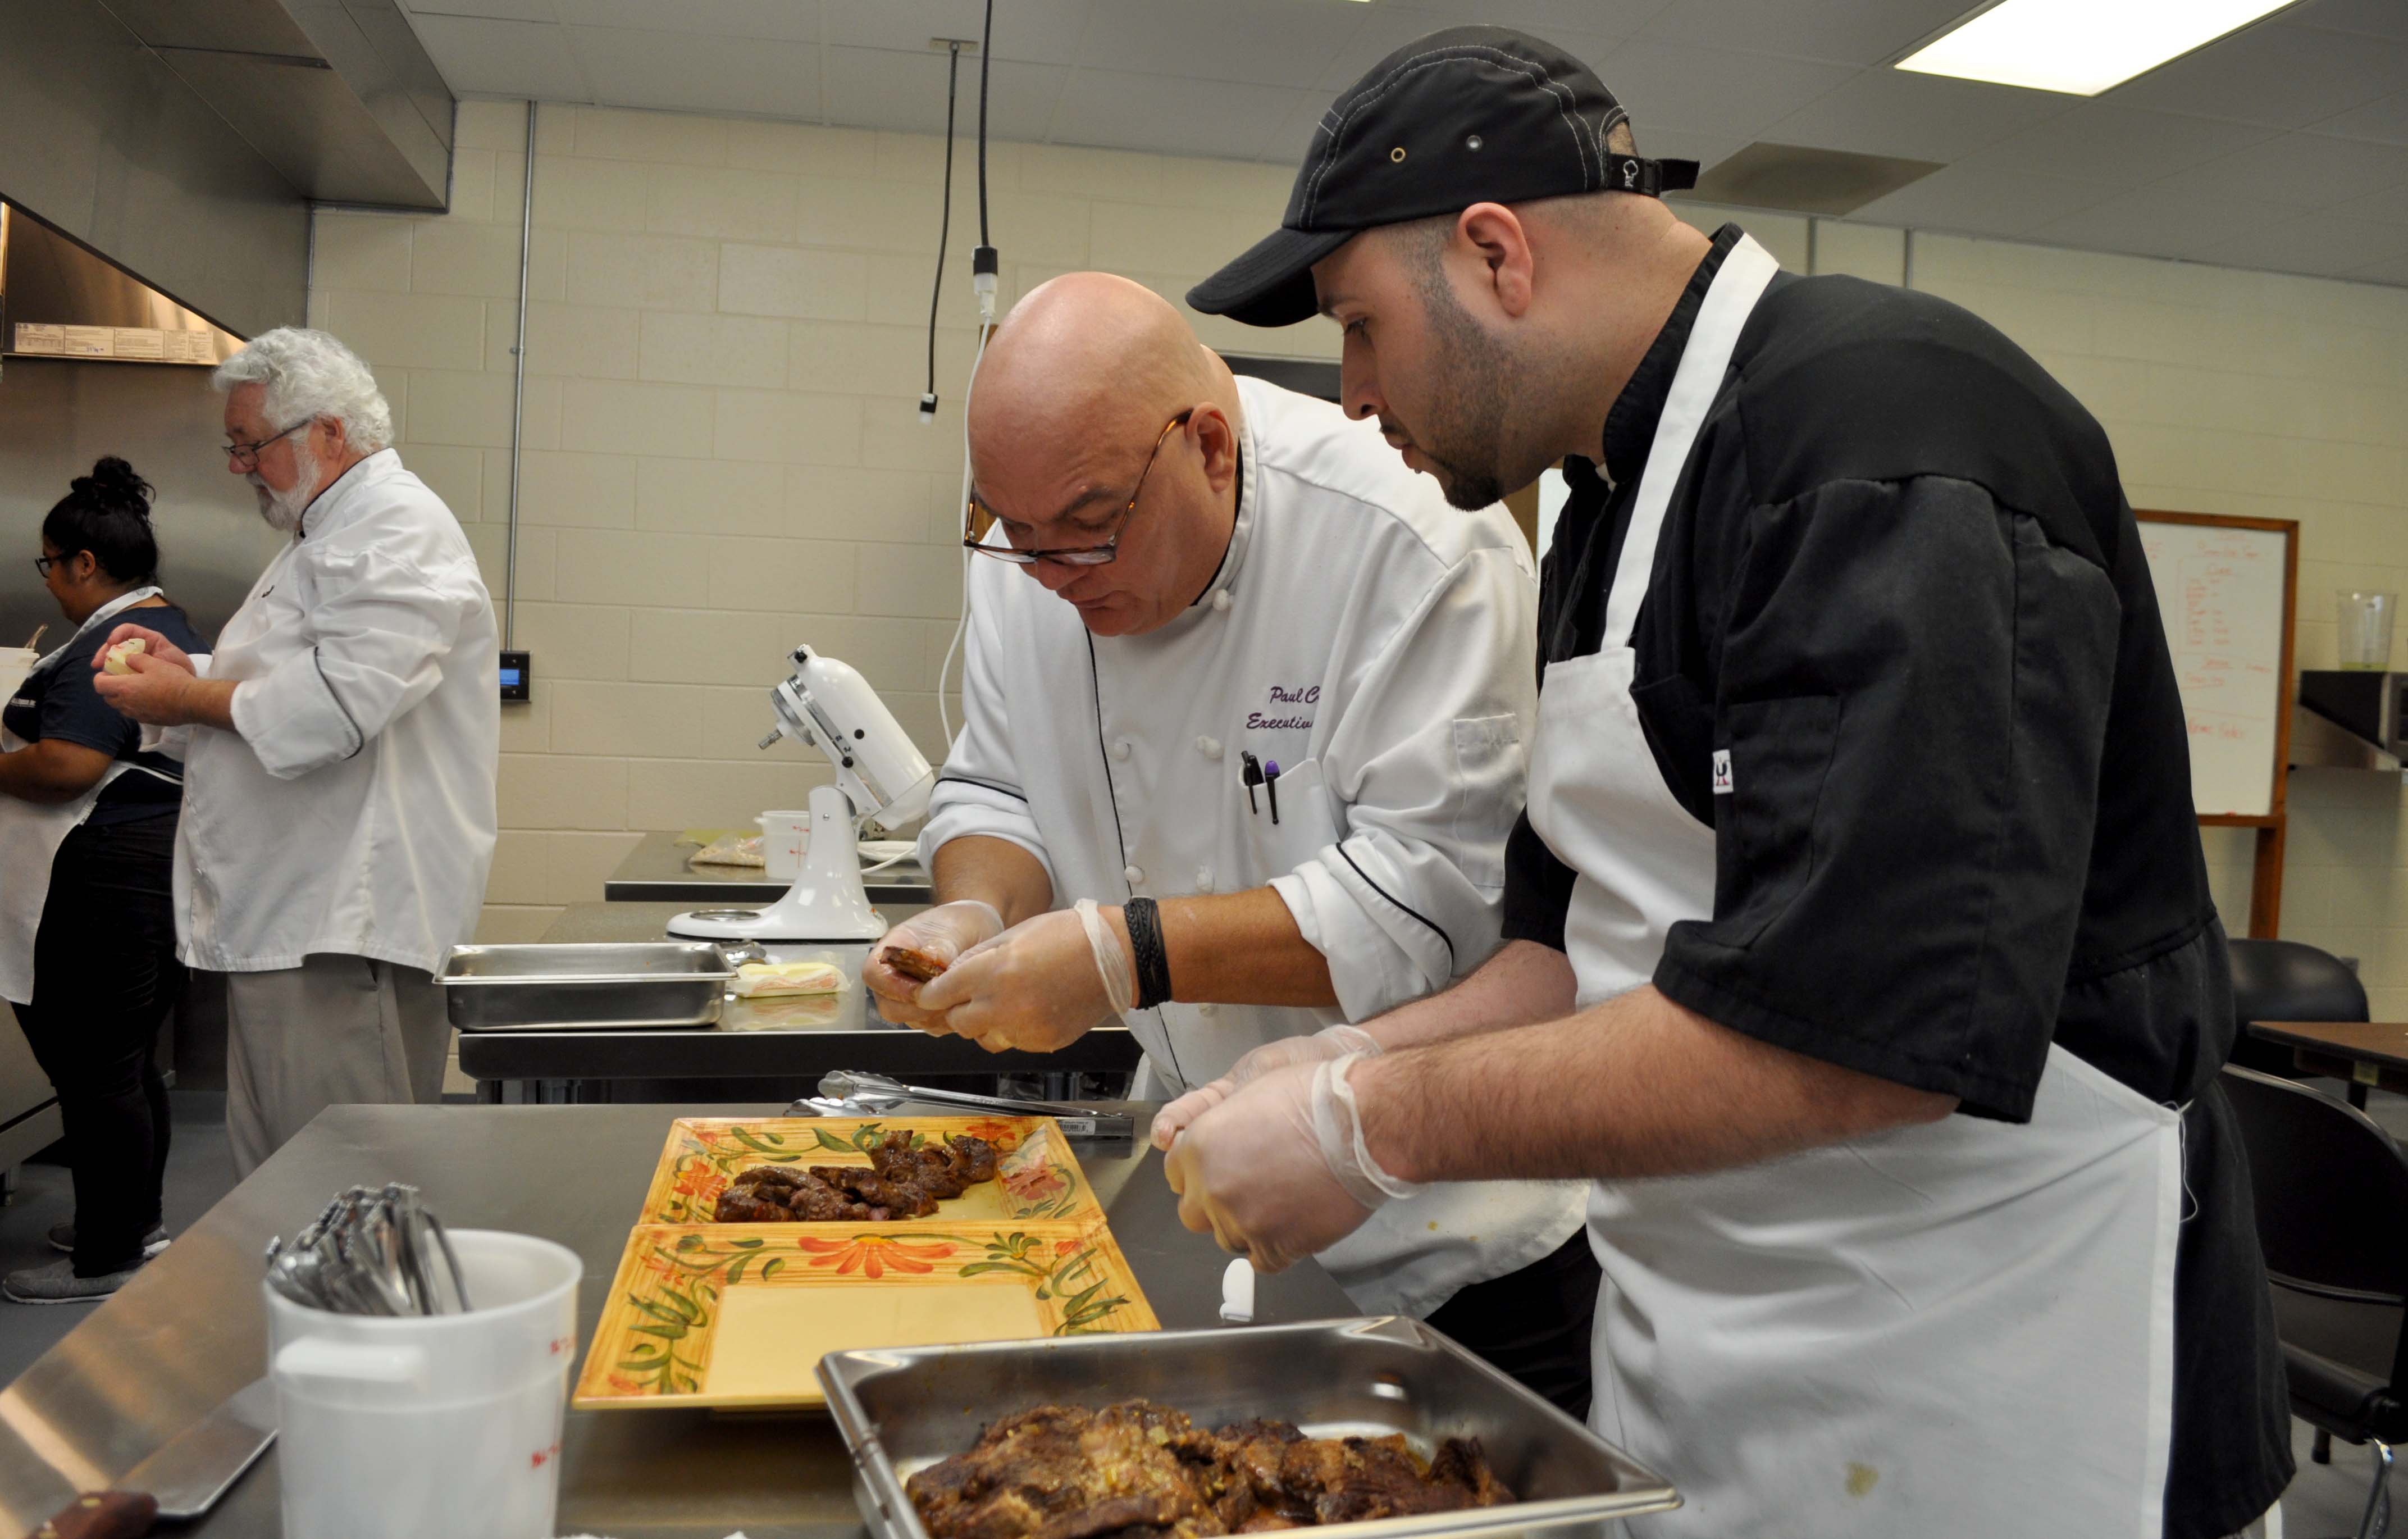 Cooking instructor shows student how to plate food.